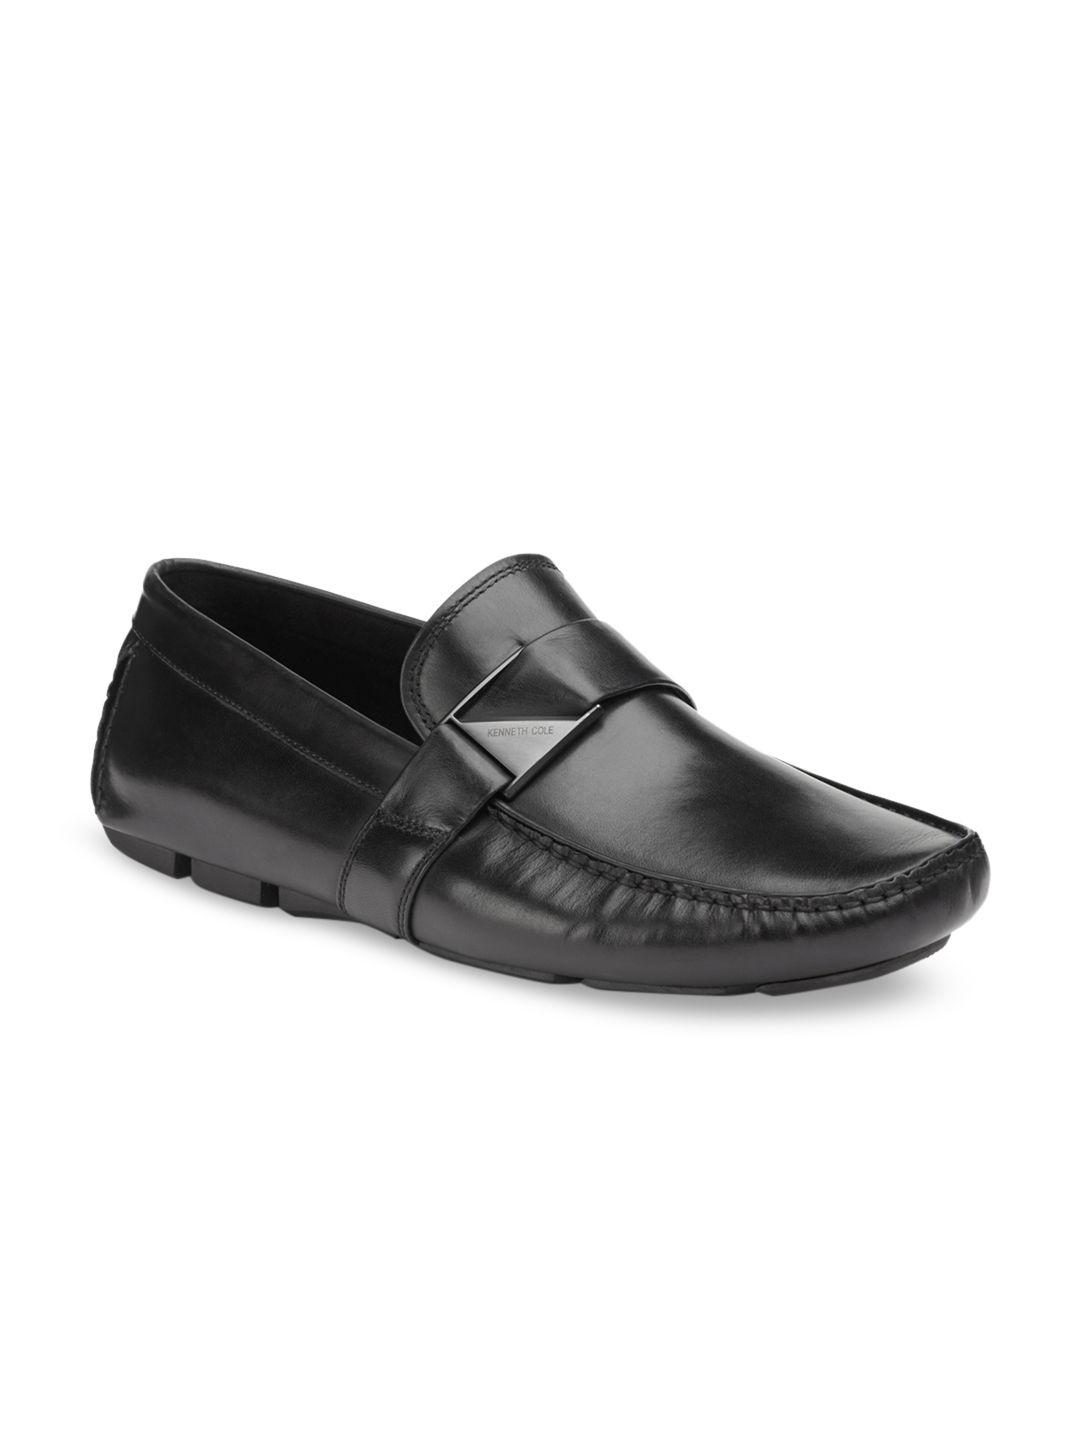 kenneth-cole-men-black-leather-penny-loafers